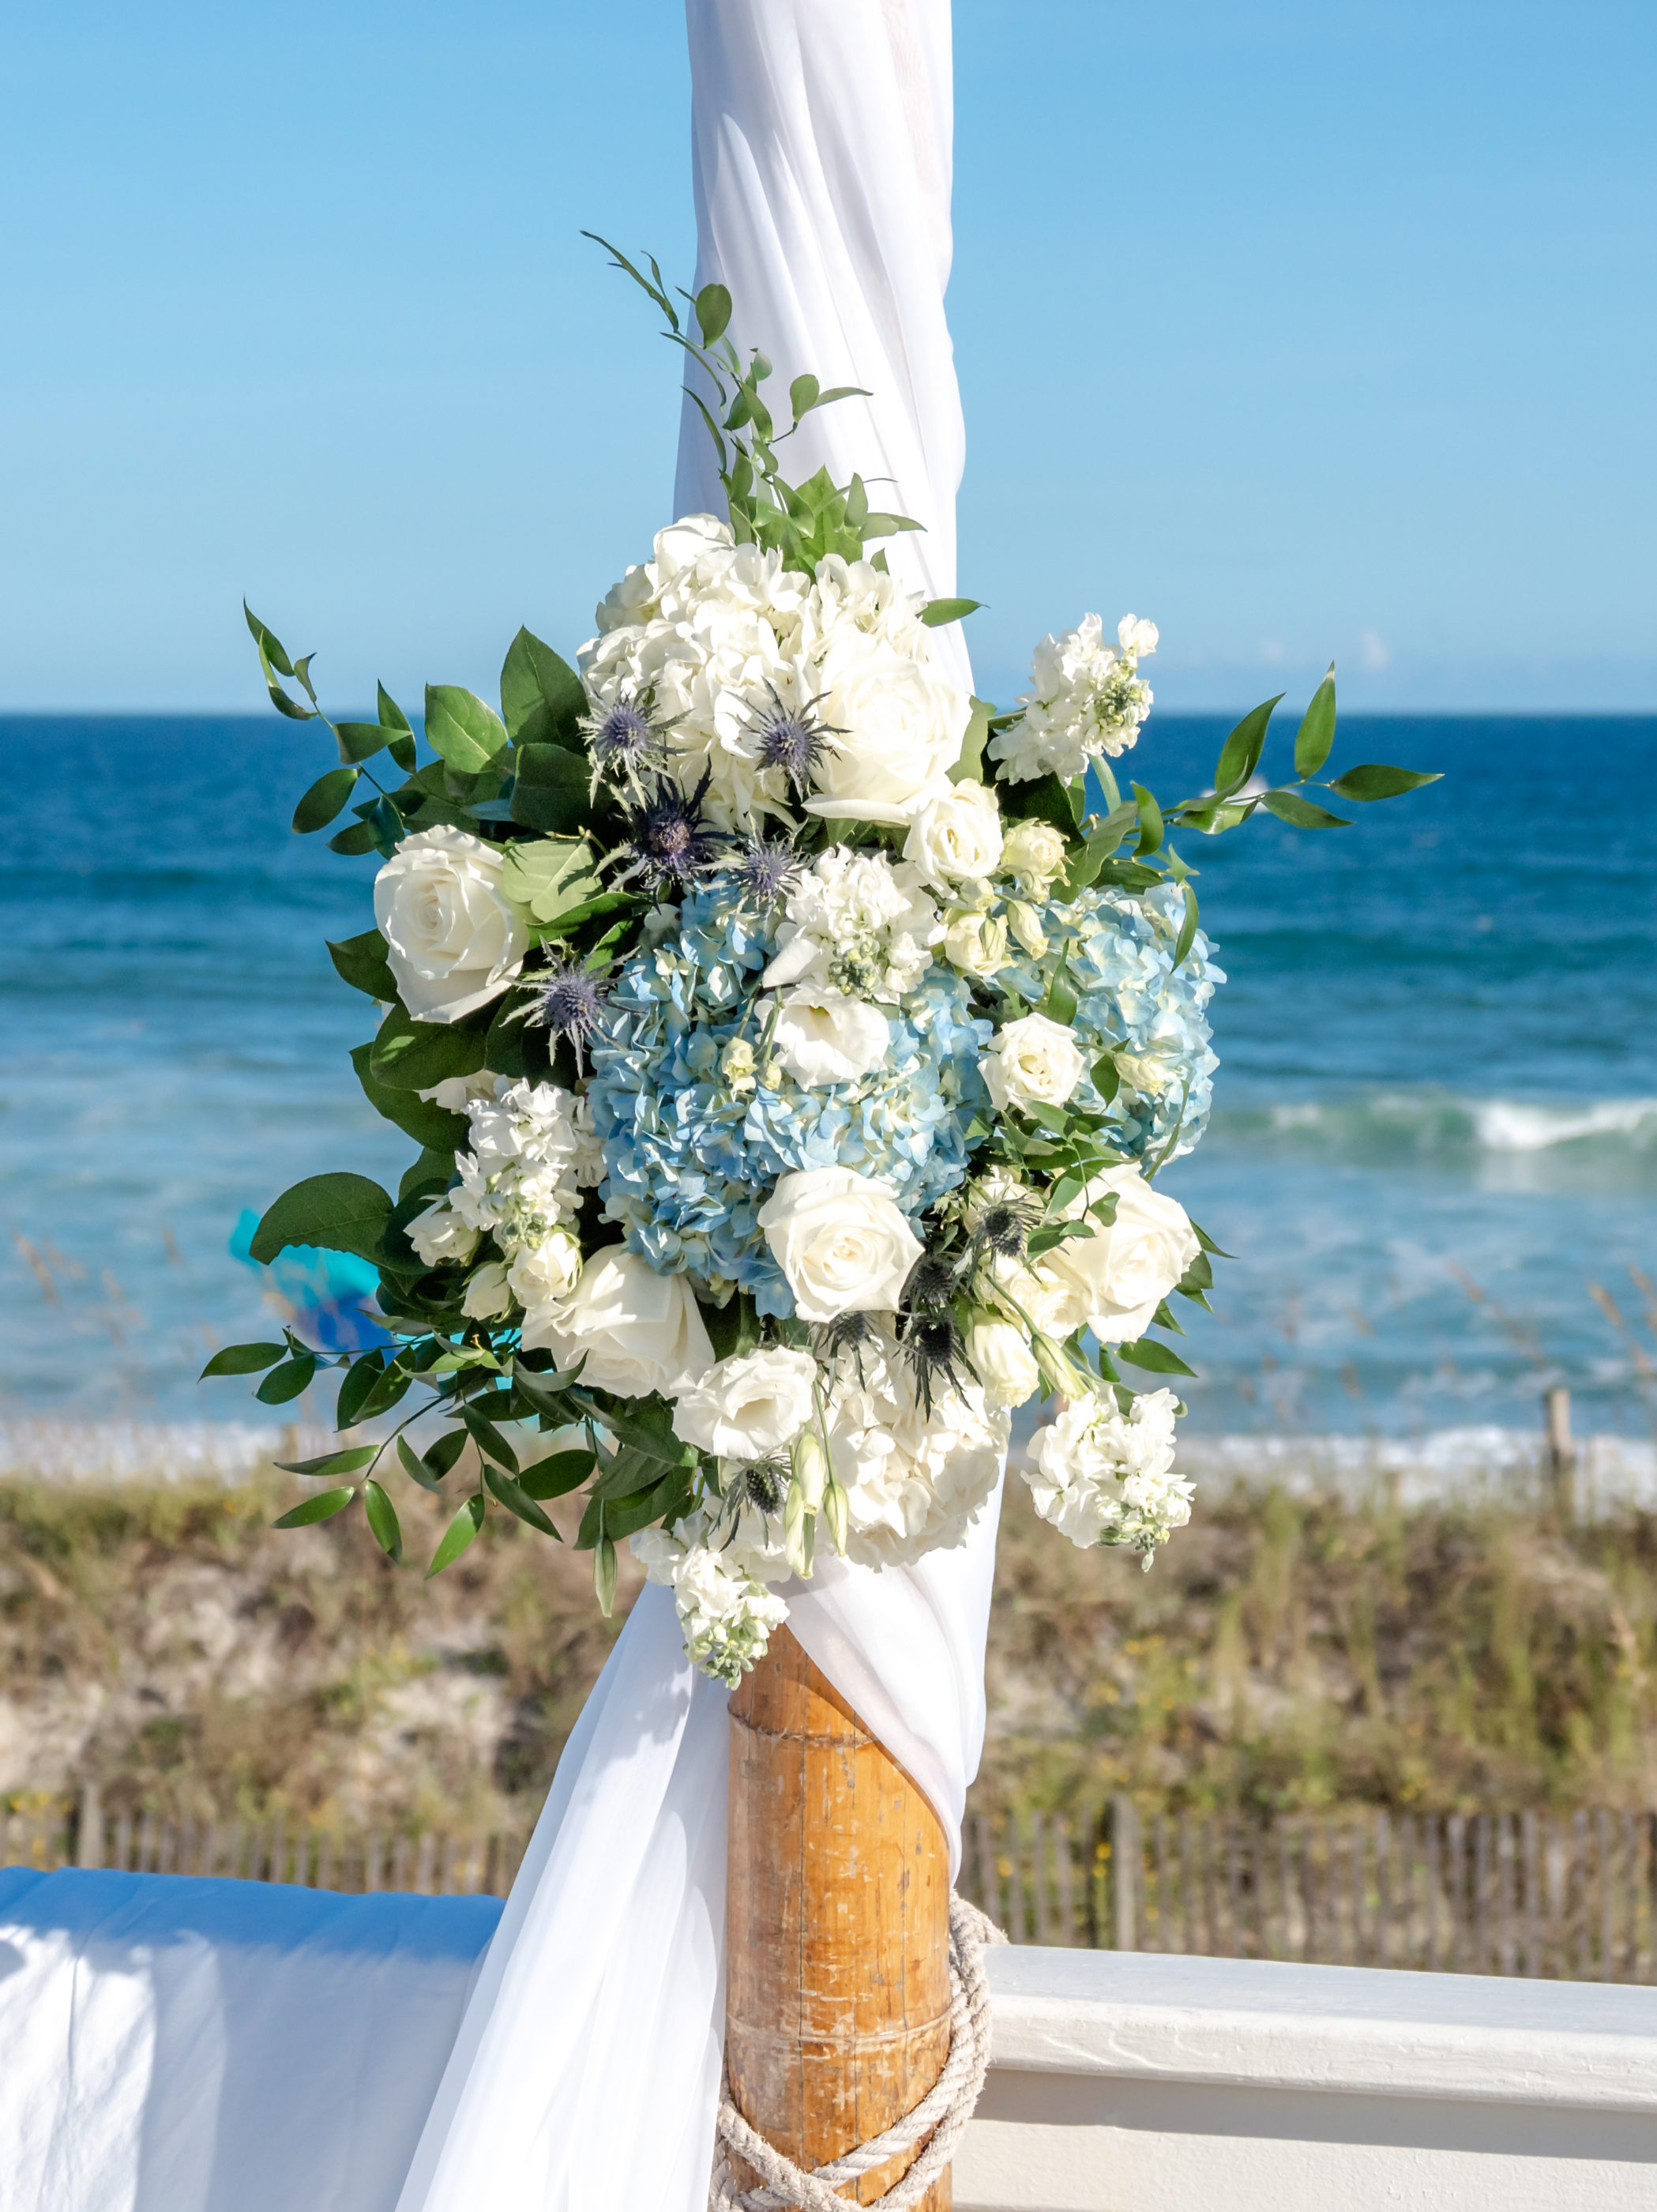 Blue hydrangeas and white roses with greenery at the center of a bamboo arch.